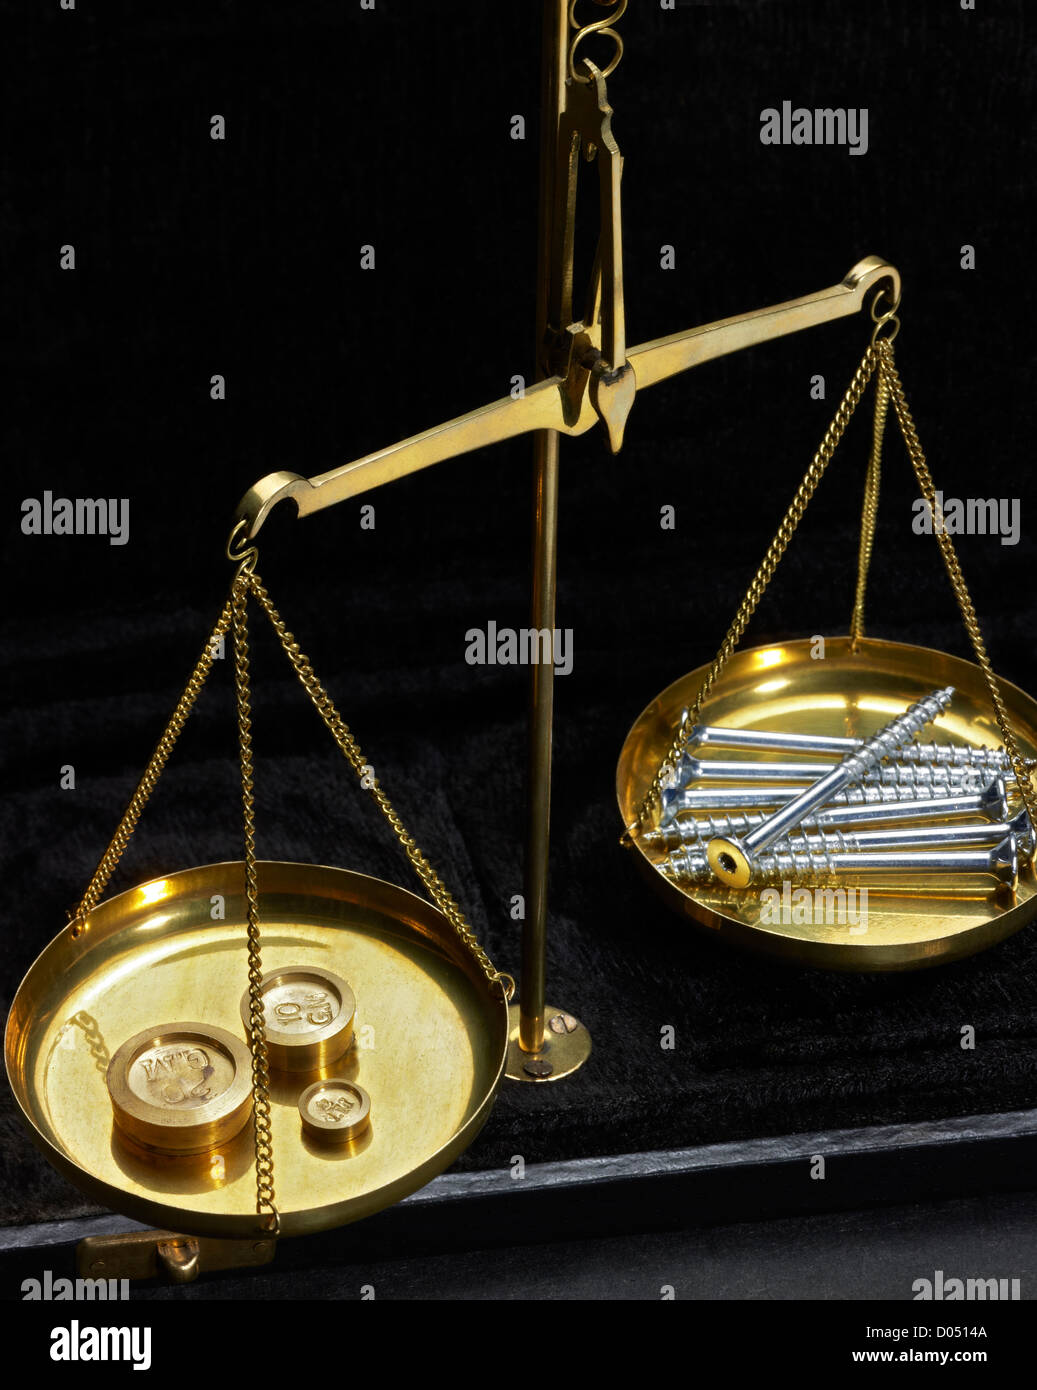 Metal Brass Weighing Scale Balance Weight Measurement Showpiece For Law  Justice